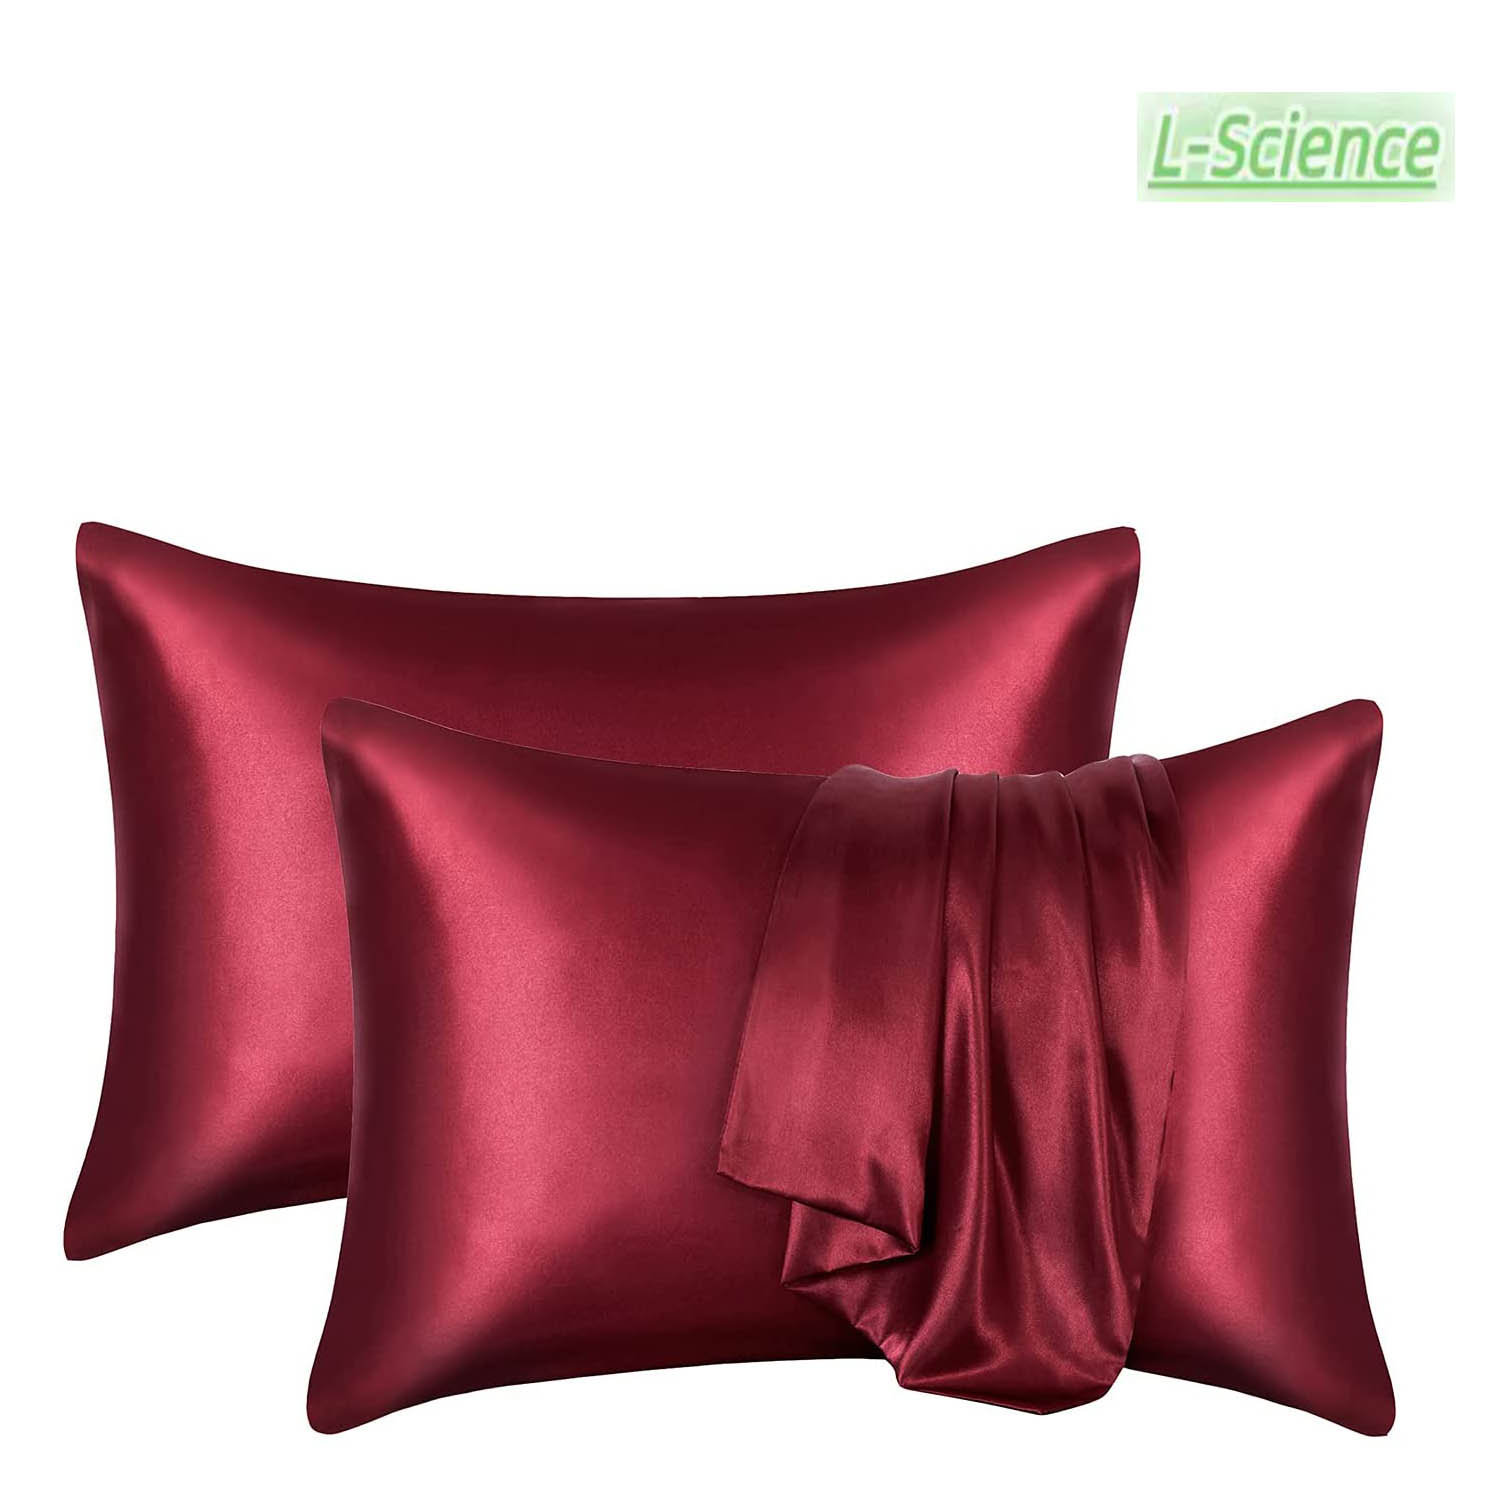 L-Science Satin Pillowcase For Hair And Skin, Silk Satin Pillowcase 2 Pack,  King Size Pillow Cases Set Of 2, Silky Pillow Cover With Envelope Closure |  Wayfair